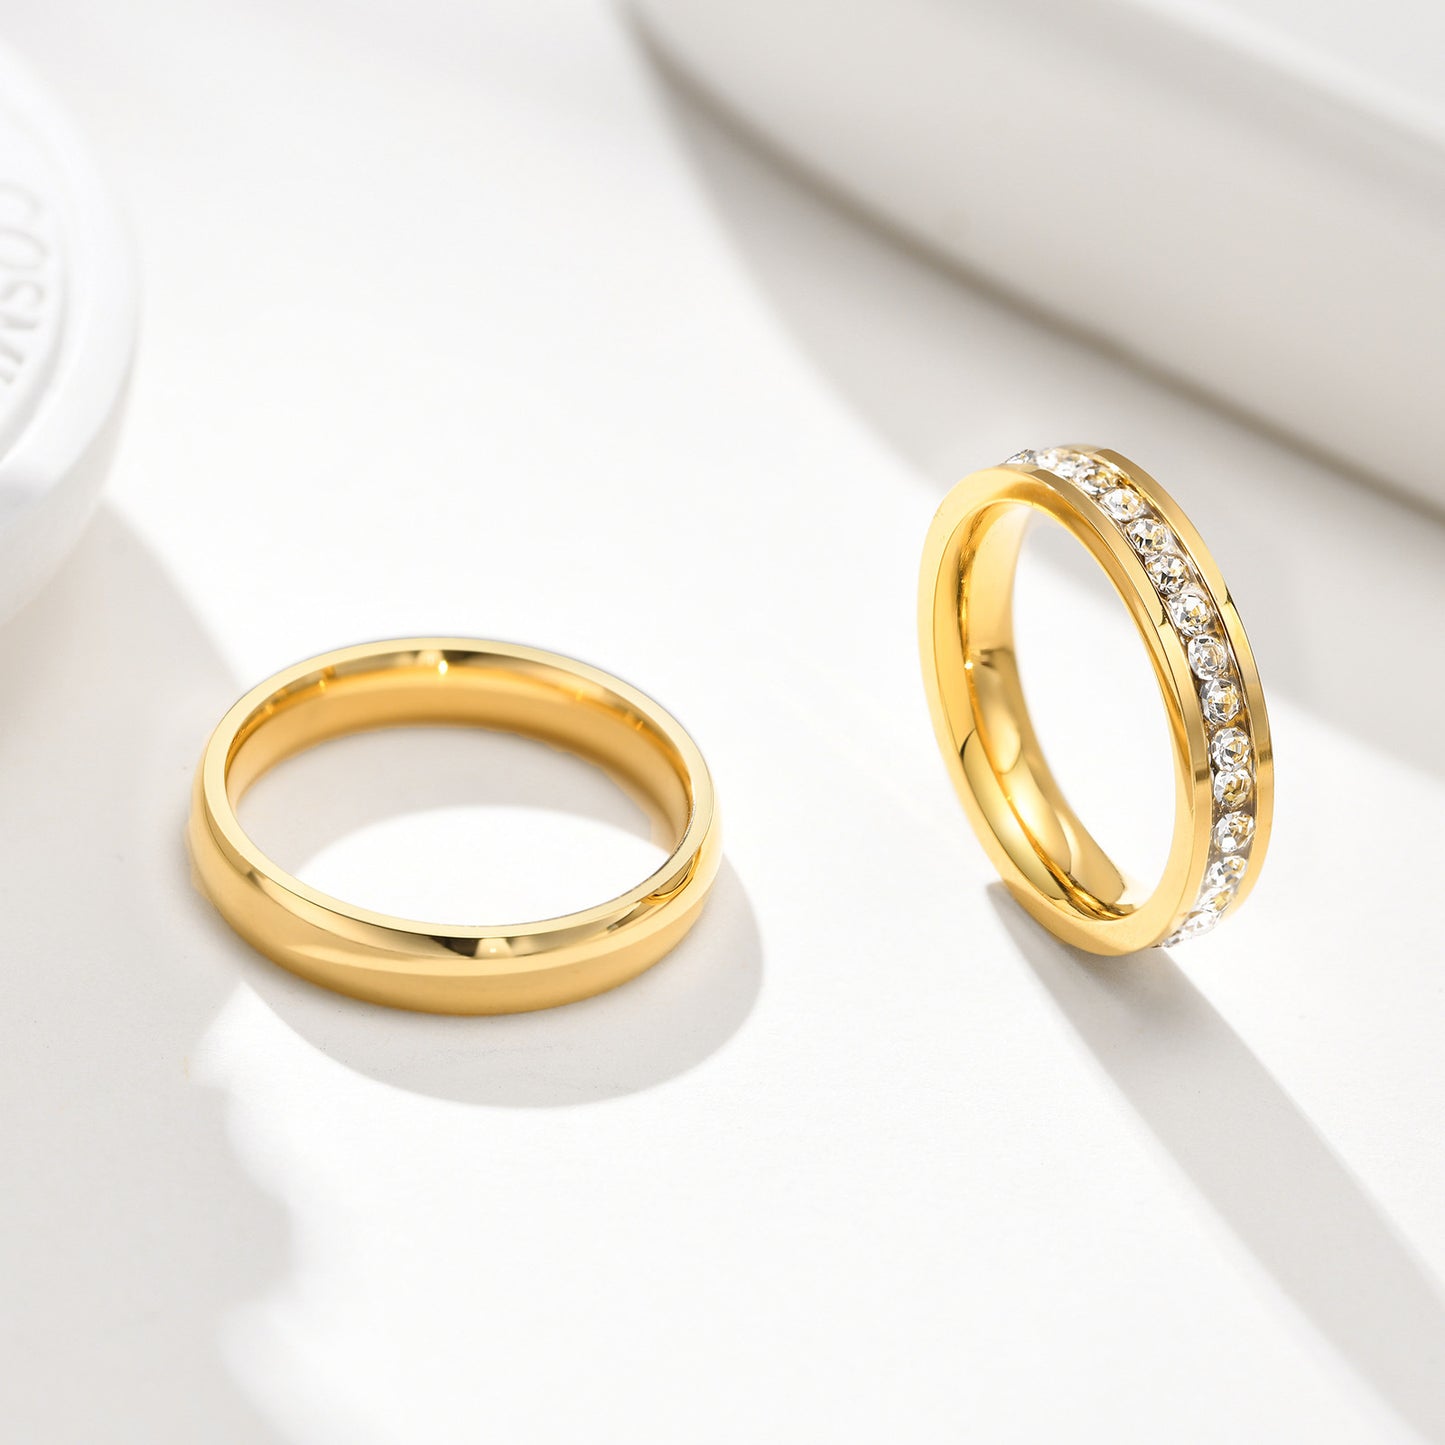 Custom Gold Plated Matching Wedding Bands for Couples